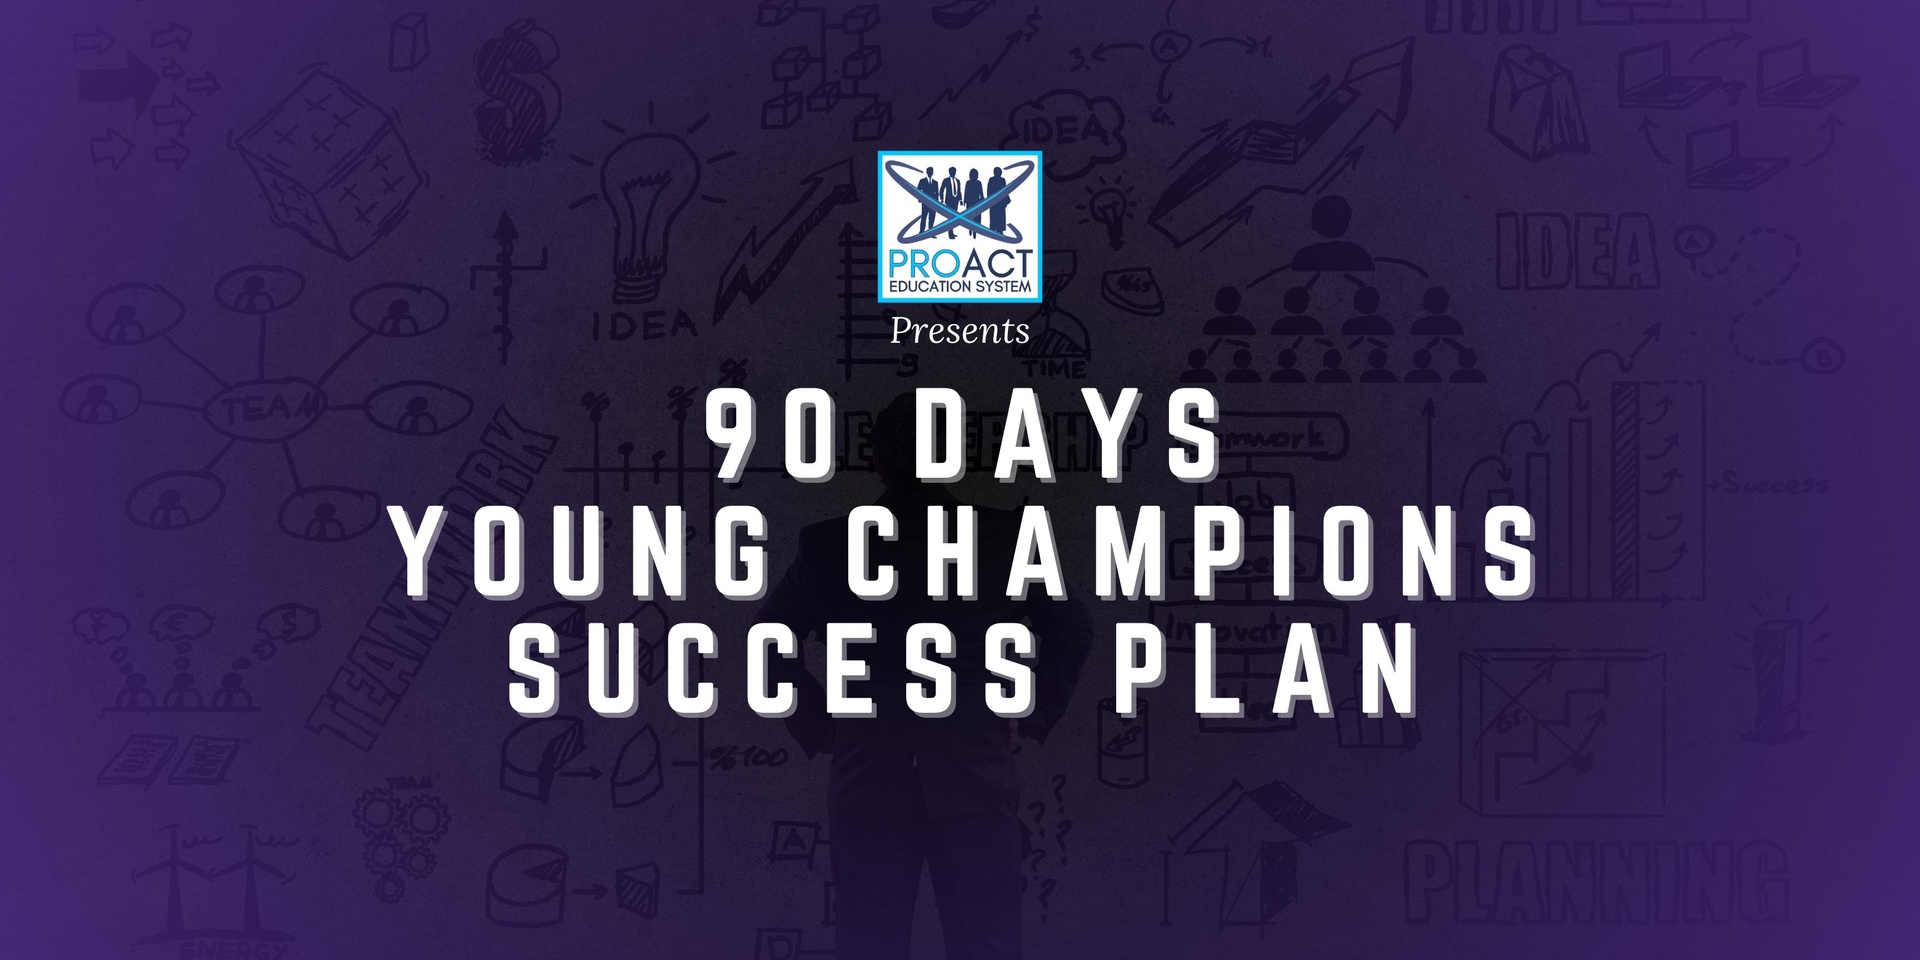 90 DAYS YOUNG CHAMPIONS SUCCESS PLAN